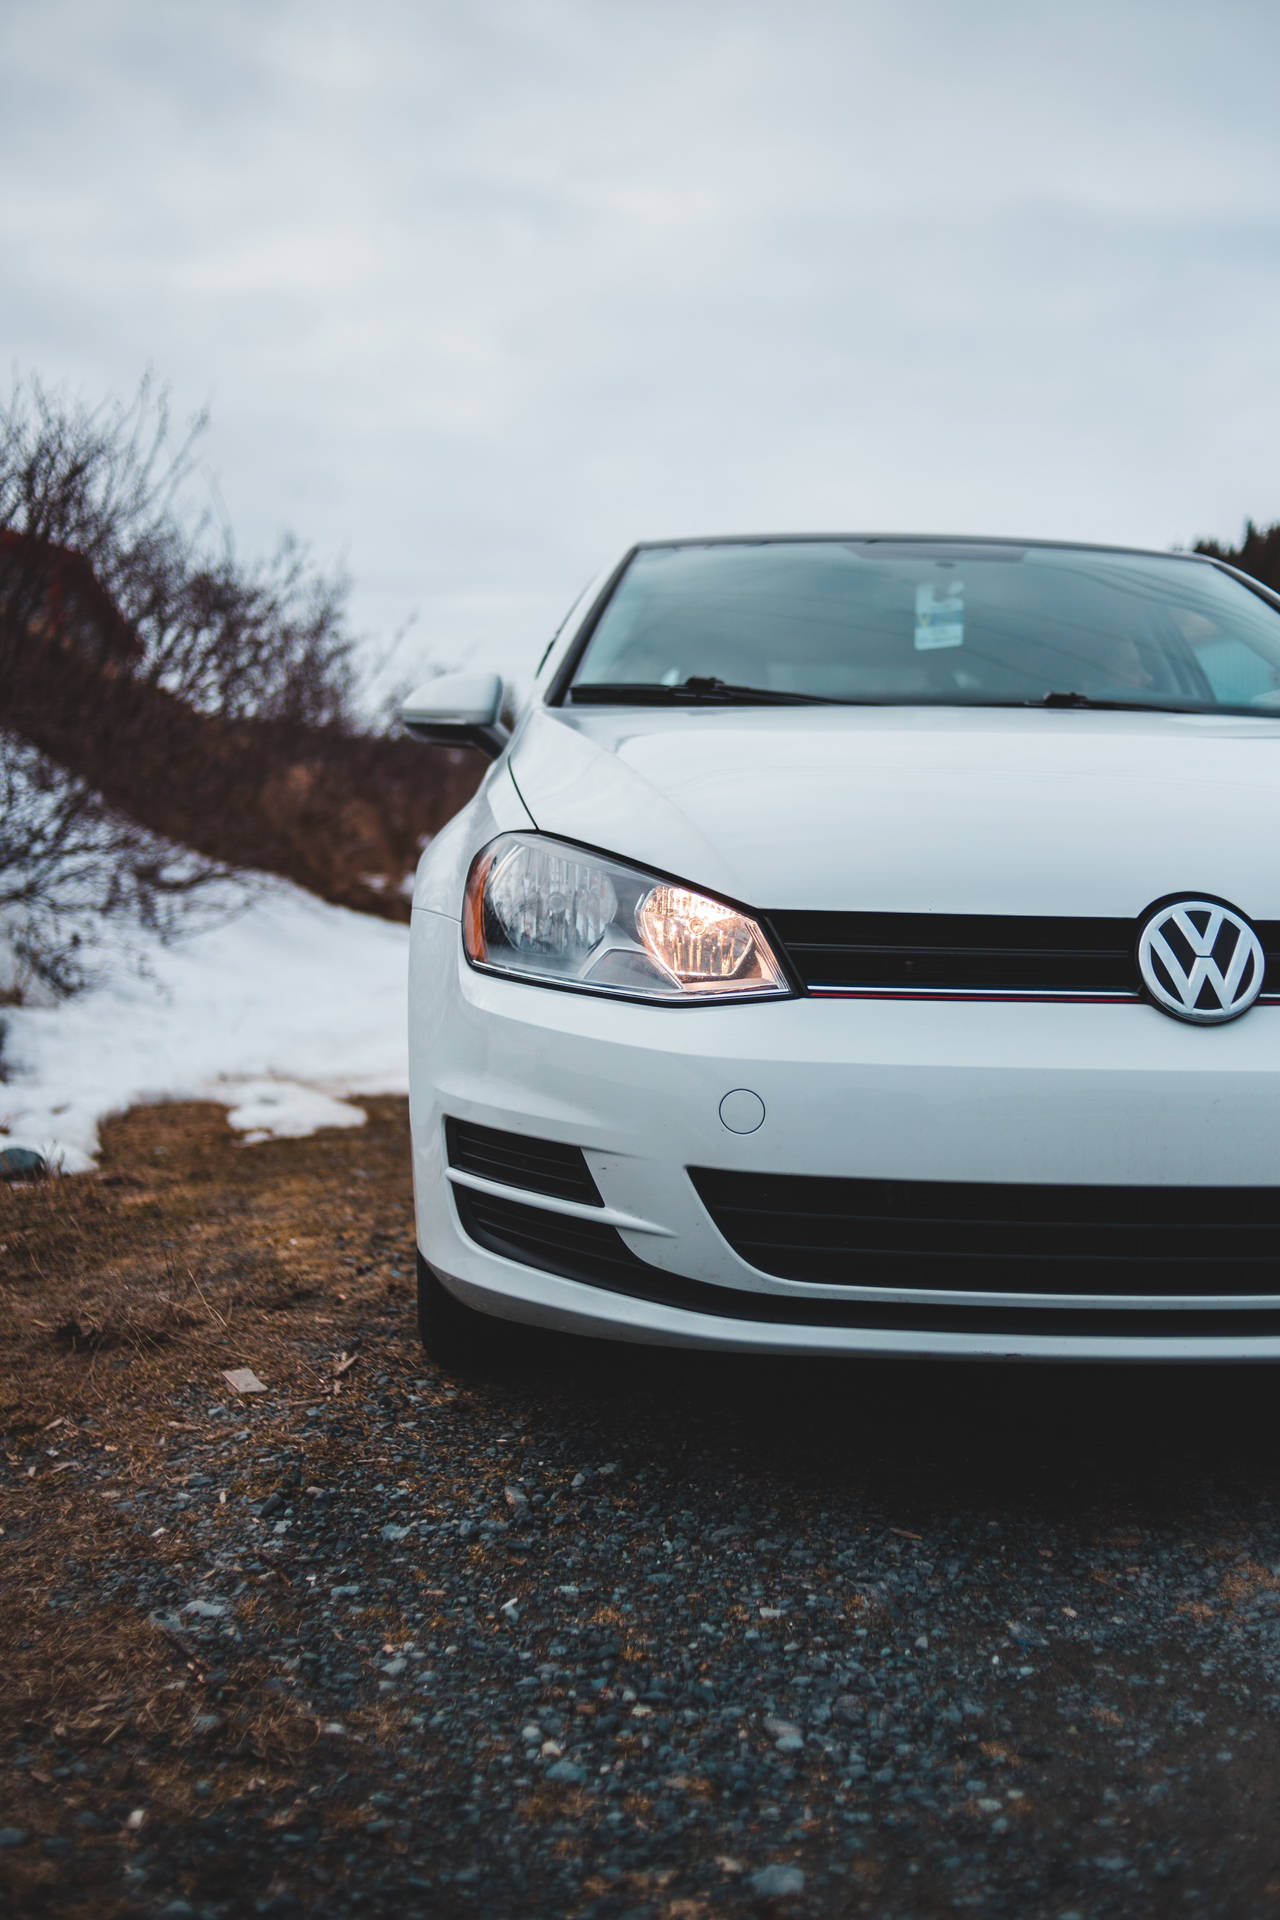 "Be Ready to Cruise in Style with Volkswagen" Wallpaper